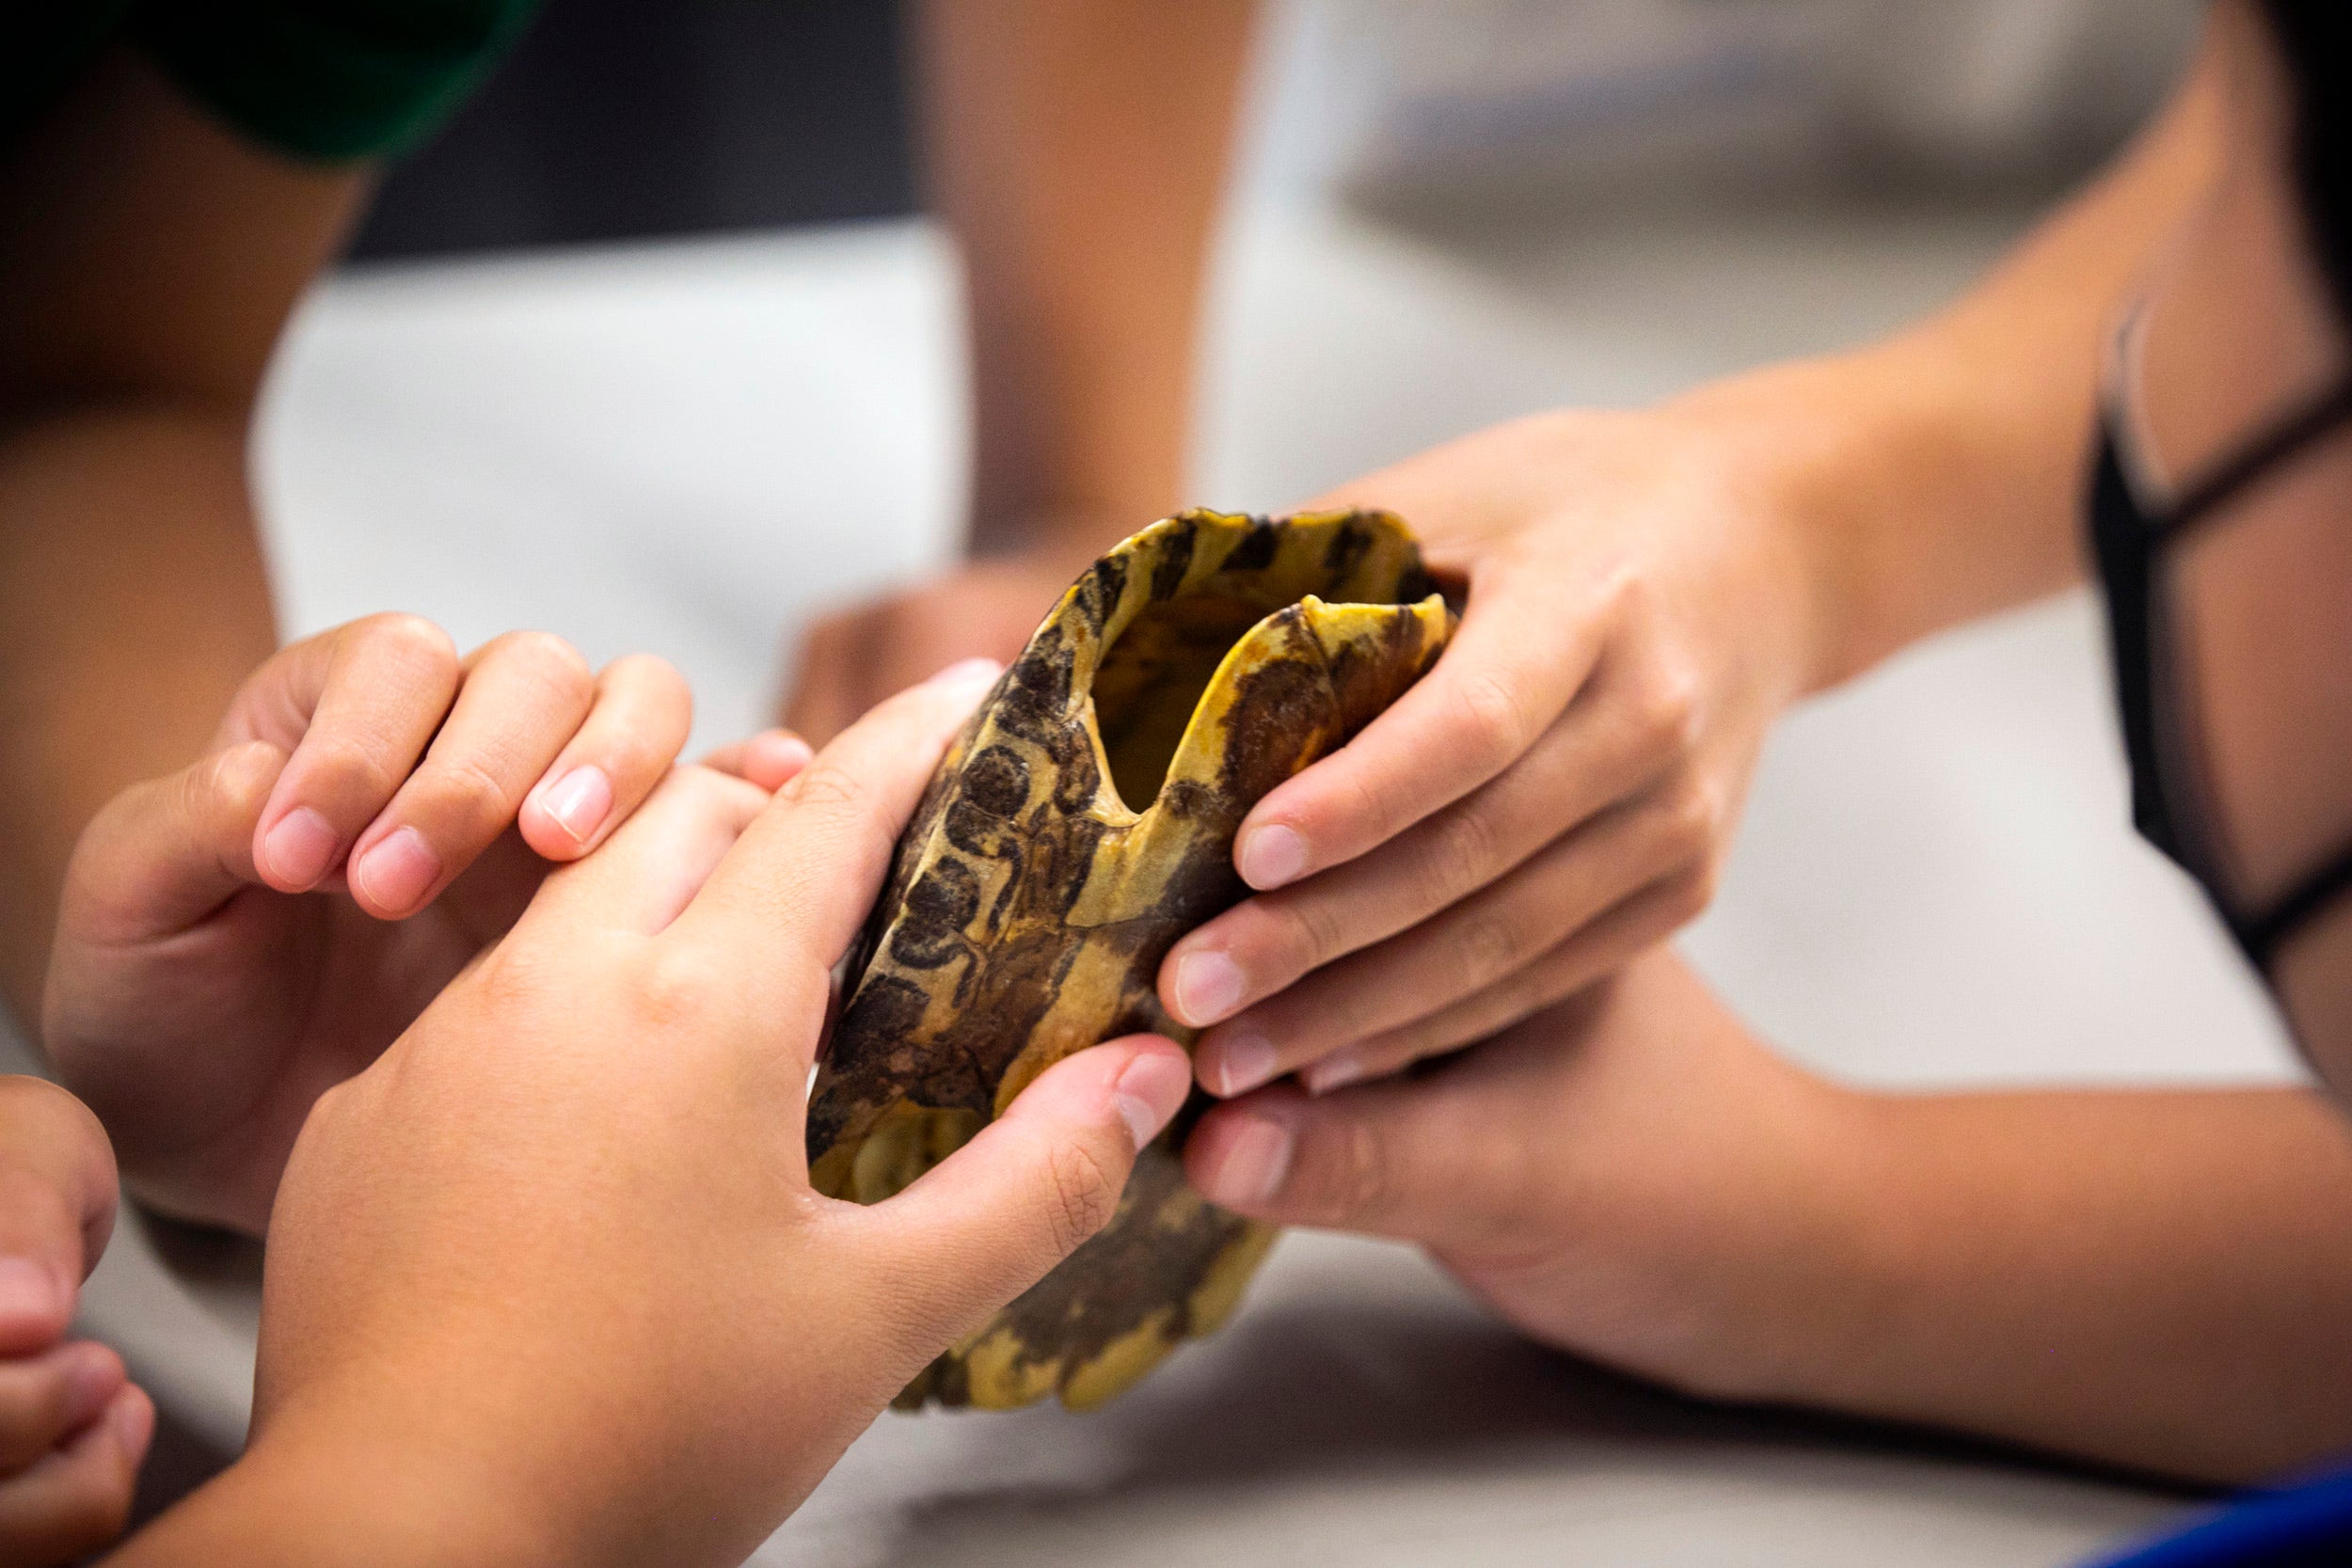 Students closely examine a snapping turtle shell.